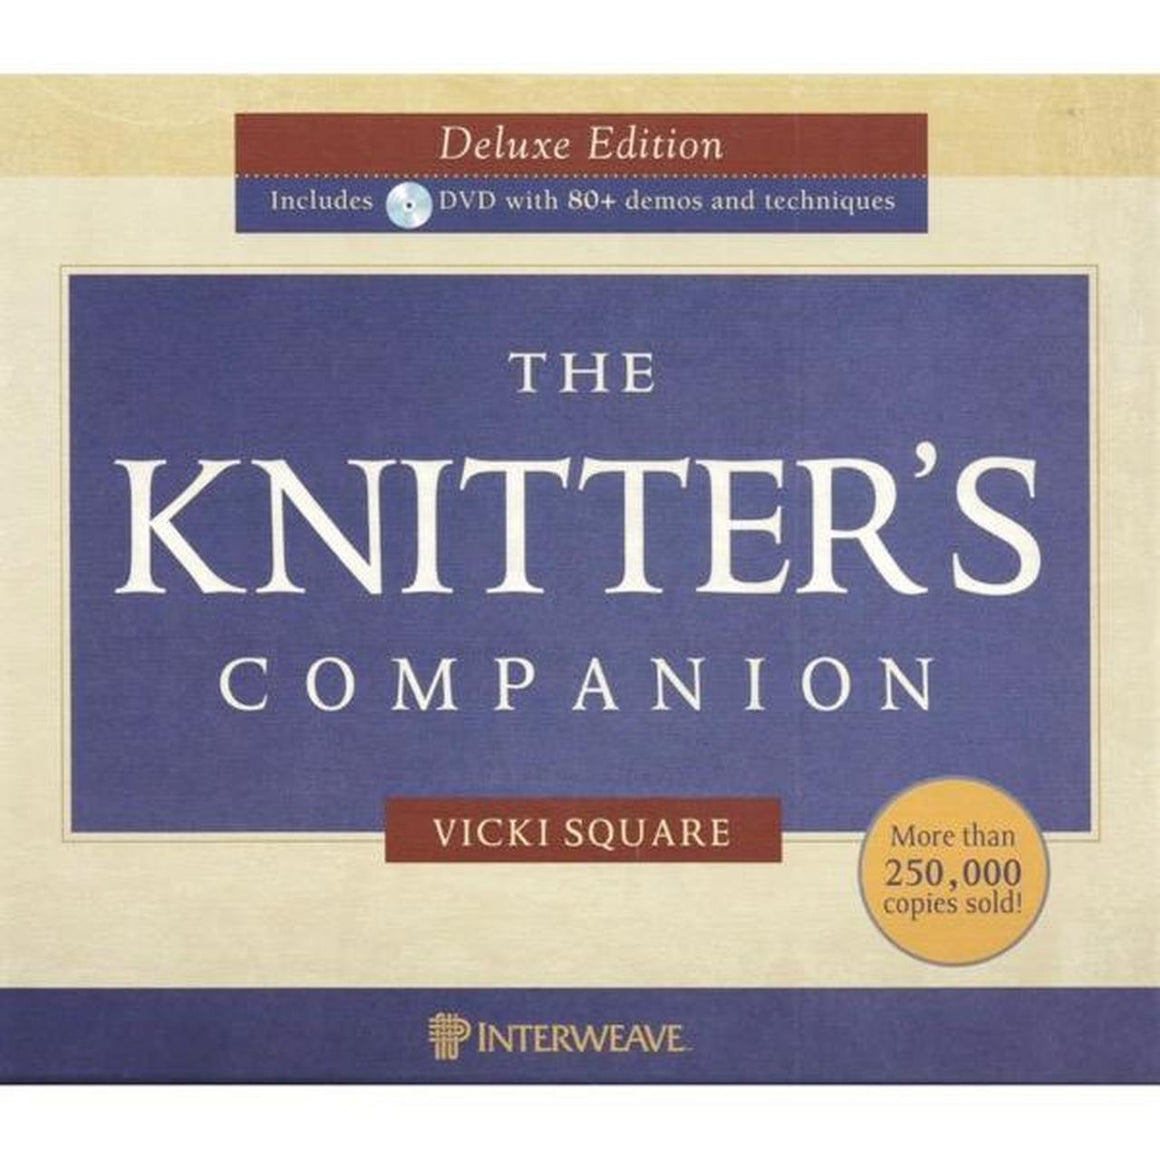 The Knitter's Companion- Deluxe Edition